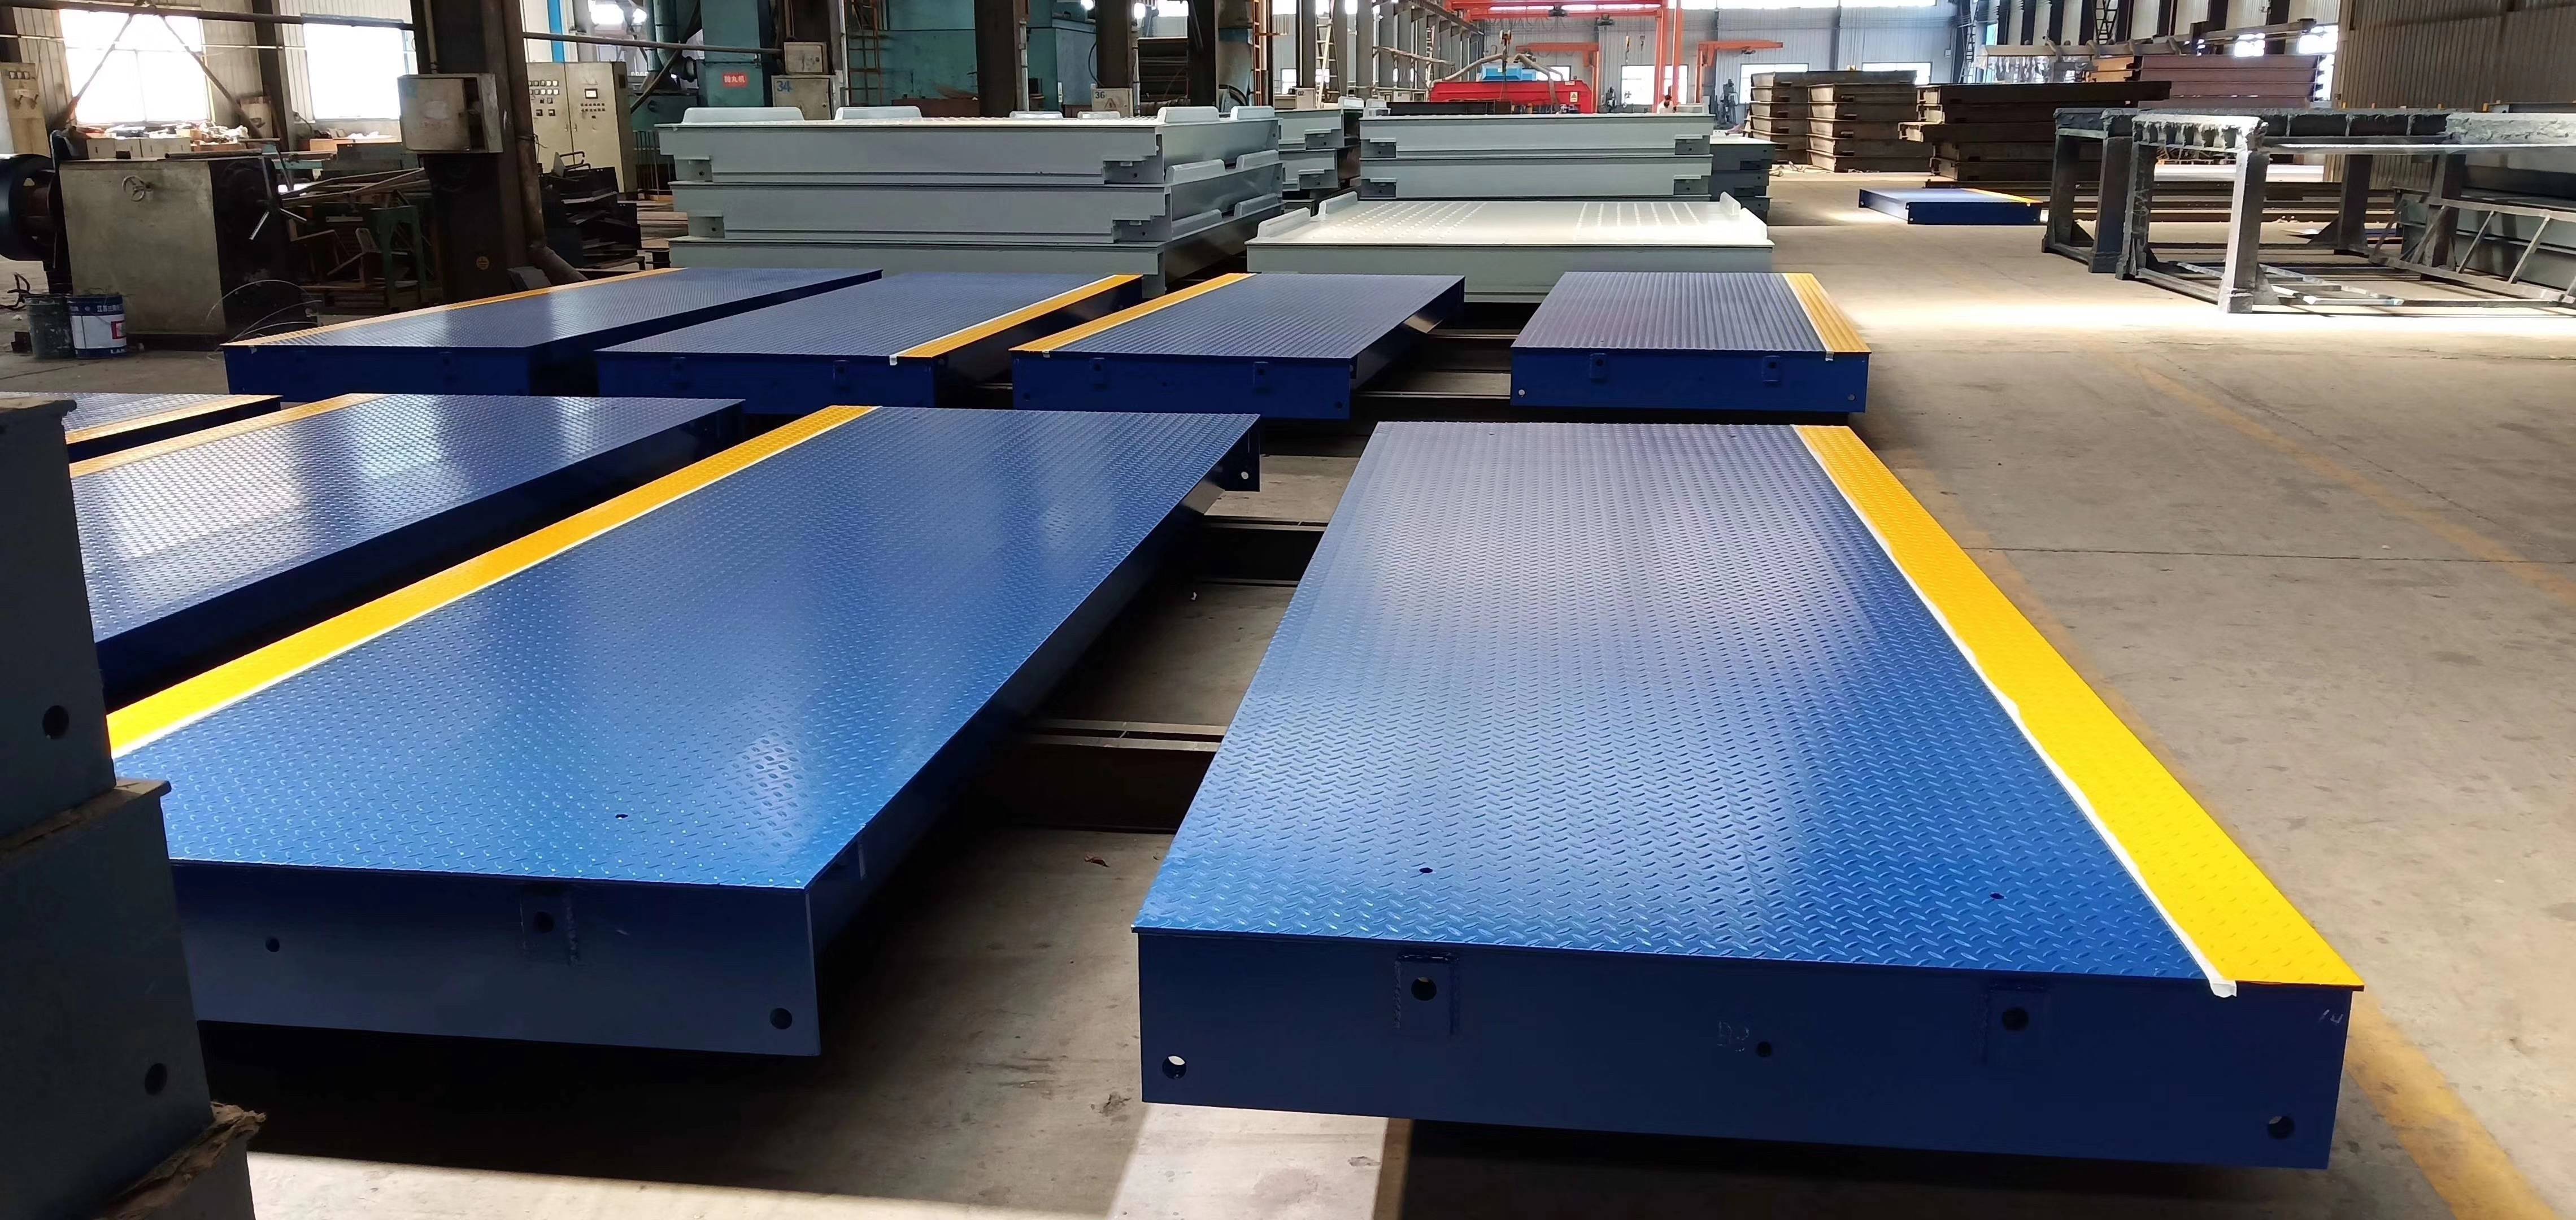 Truck Scales - Pit & Pitless - Manufacturer of Conveyor Scales,  Checkweighers and Automatic Labeling Systems